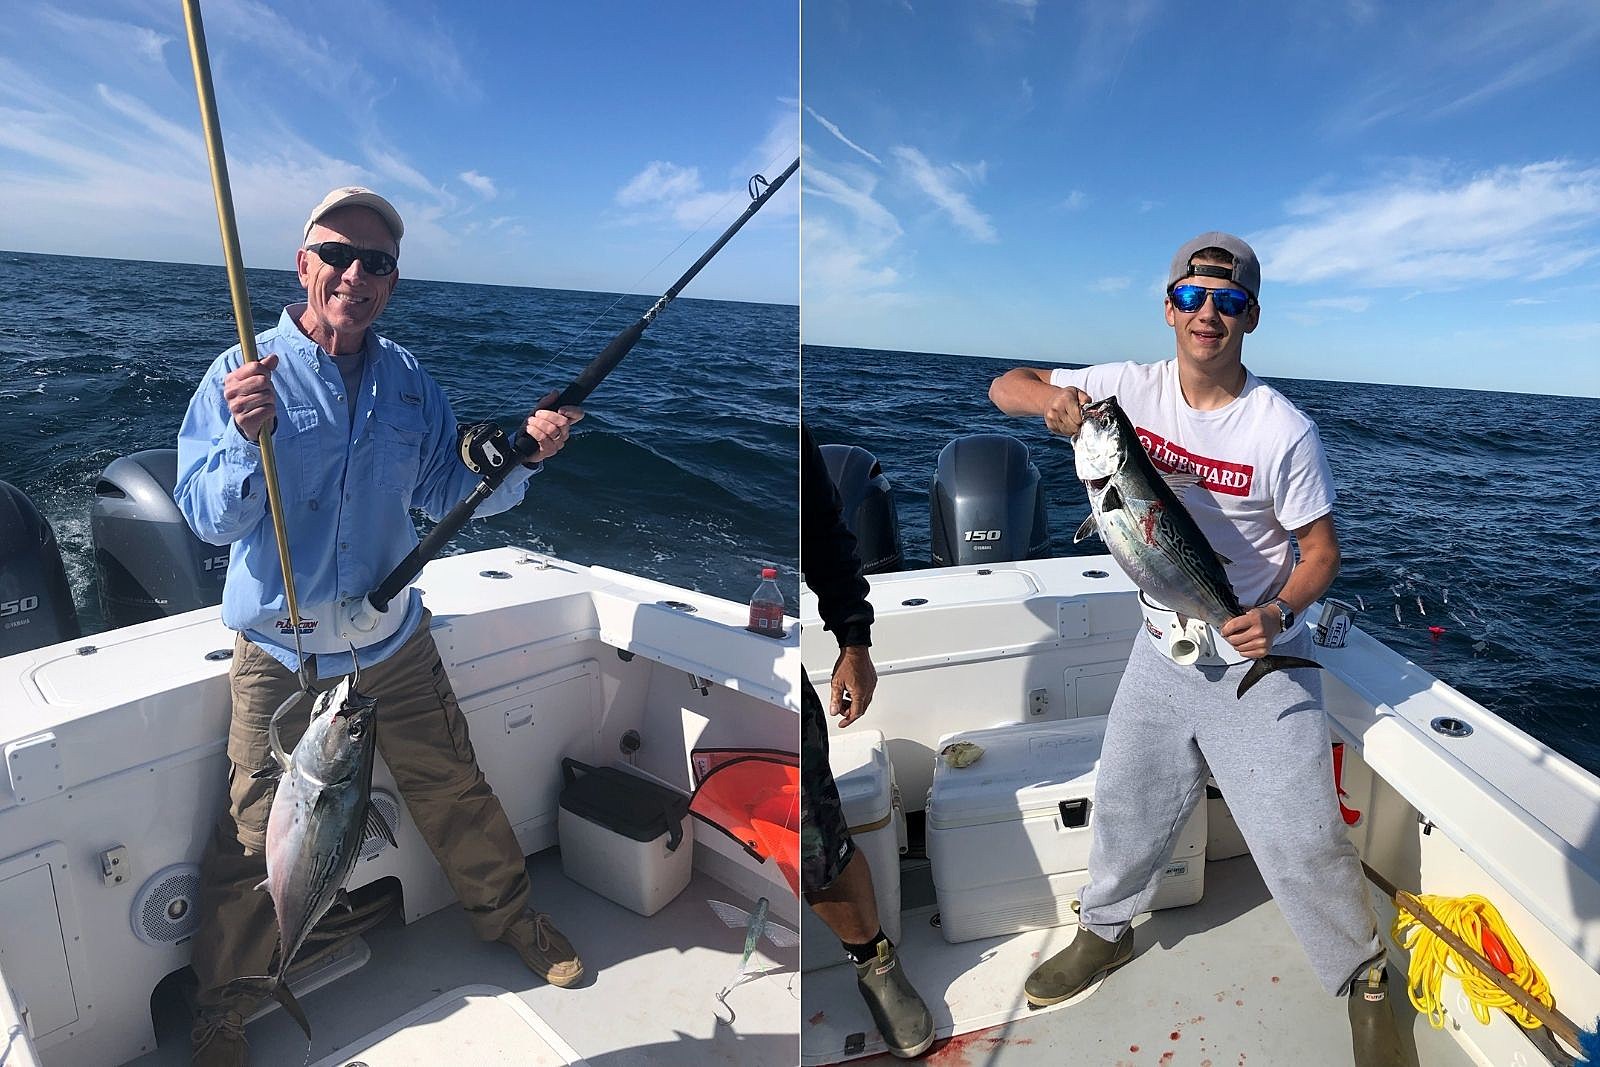 How To: Outer Banks Sight Casting to False Albacore with the Hogy